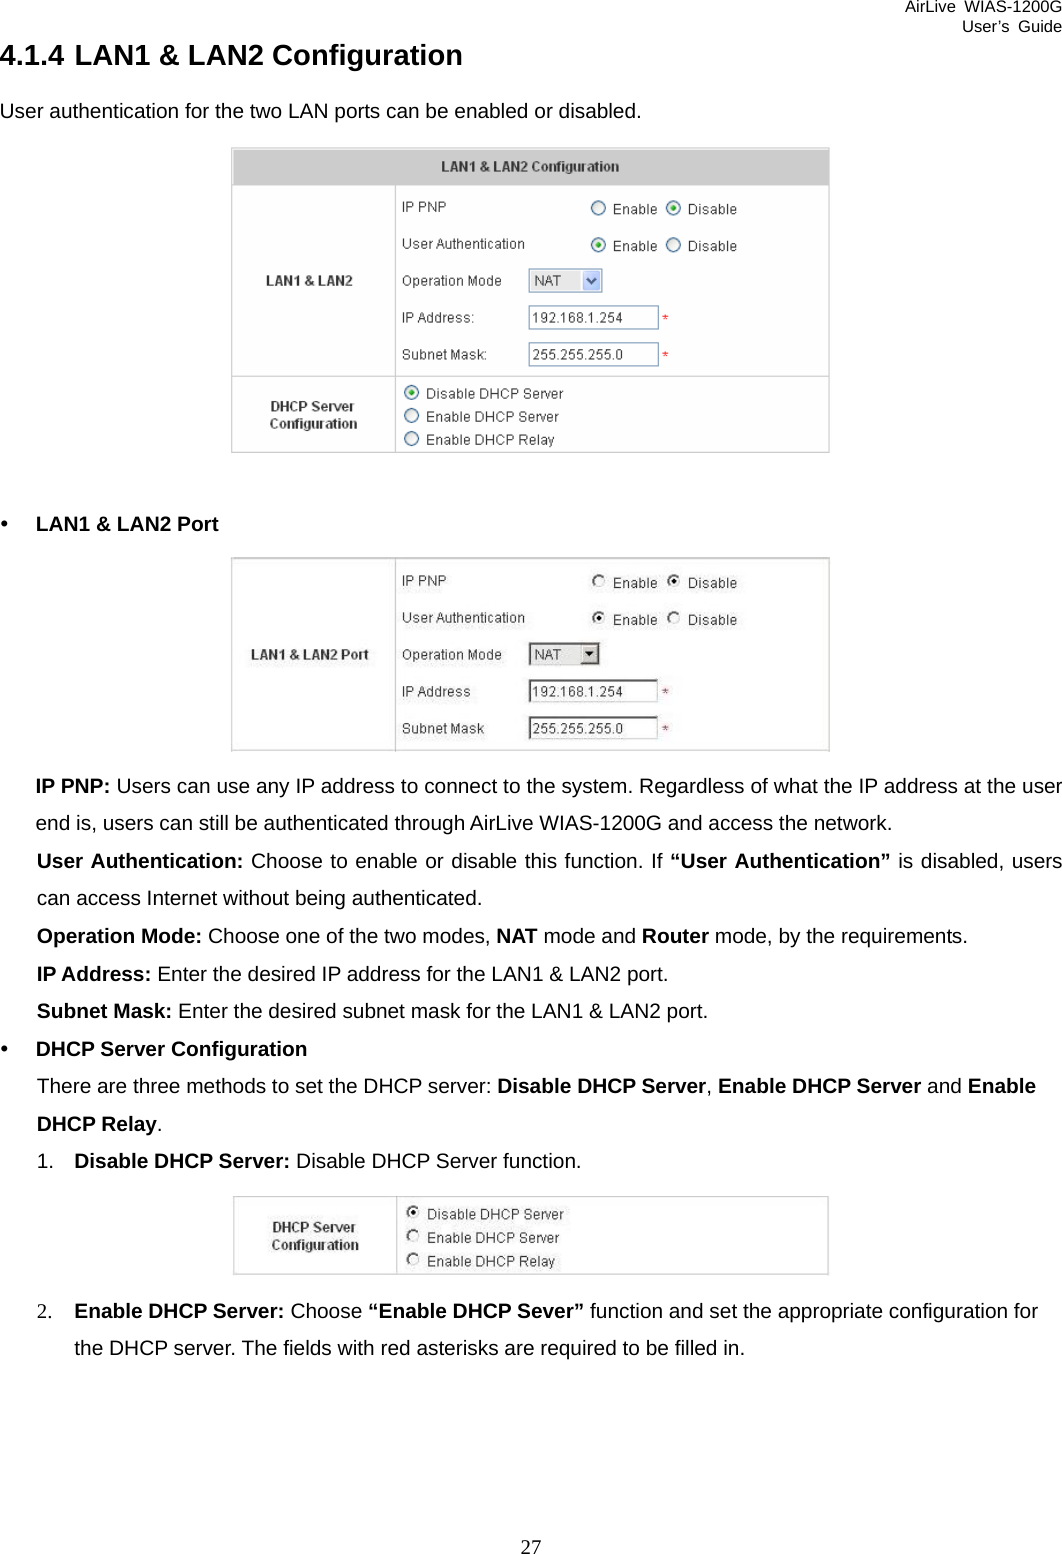 AirLive WIAS-1200G User’s Guide 27 4.1.4 LAN1 &amp; LAN2 Configuration User authentication for the two LAN ports can be enabled or disabled.   y LAN1 &amp; LAN2 Port  IP PNP: Users can use any IP address to connect to the system. Regardless of what the IP address at the user end is, users can still be authenticated through AirLive WIAS-1200G and access the network. User Authentication: Choose to enable or disable this function. If “User Authentication” is disabled, users can access Internet without being authenticated. Operation Mode: Choose one of the two modes, NAT mode and Router mode, by the requirements. IP Address: Enter the desired IP address for the LAN1 &amp; LAN2 port. Subnet Mask: Enter the desired subnet mask for the LAN1 &amp; LAN2 port. y DHCP Server Configuration There are three methods to set the DHCP server: Disable DHCP Server, Enable DHCP Server and Enable DHCP Relay. 1.  Disable DHCP Server: Disable DHCP Server function.  2. Enable DHCP Server: Choose “Enable DHCP Sever” function and set the appropriate configuration for the DHCP server. The fields with red asterisks are required to be filled in. 